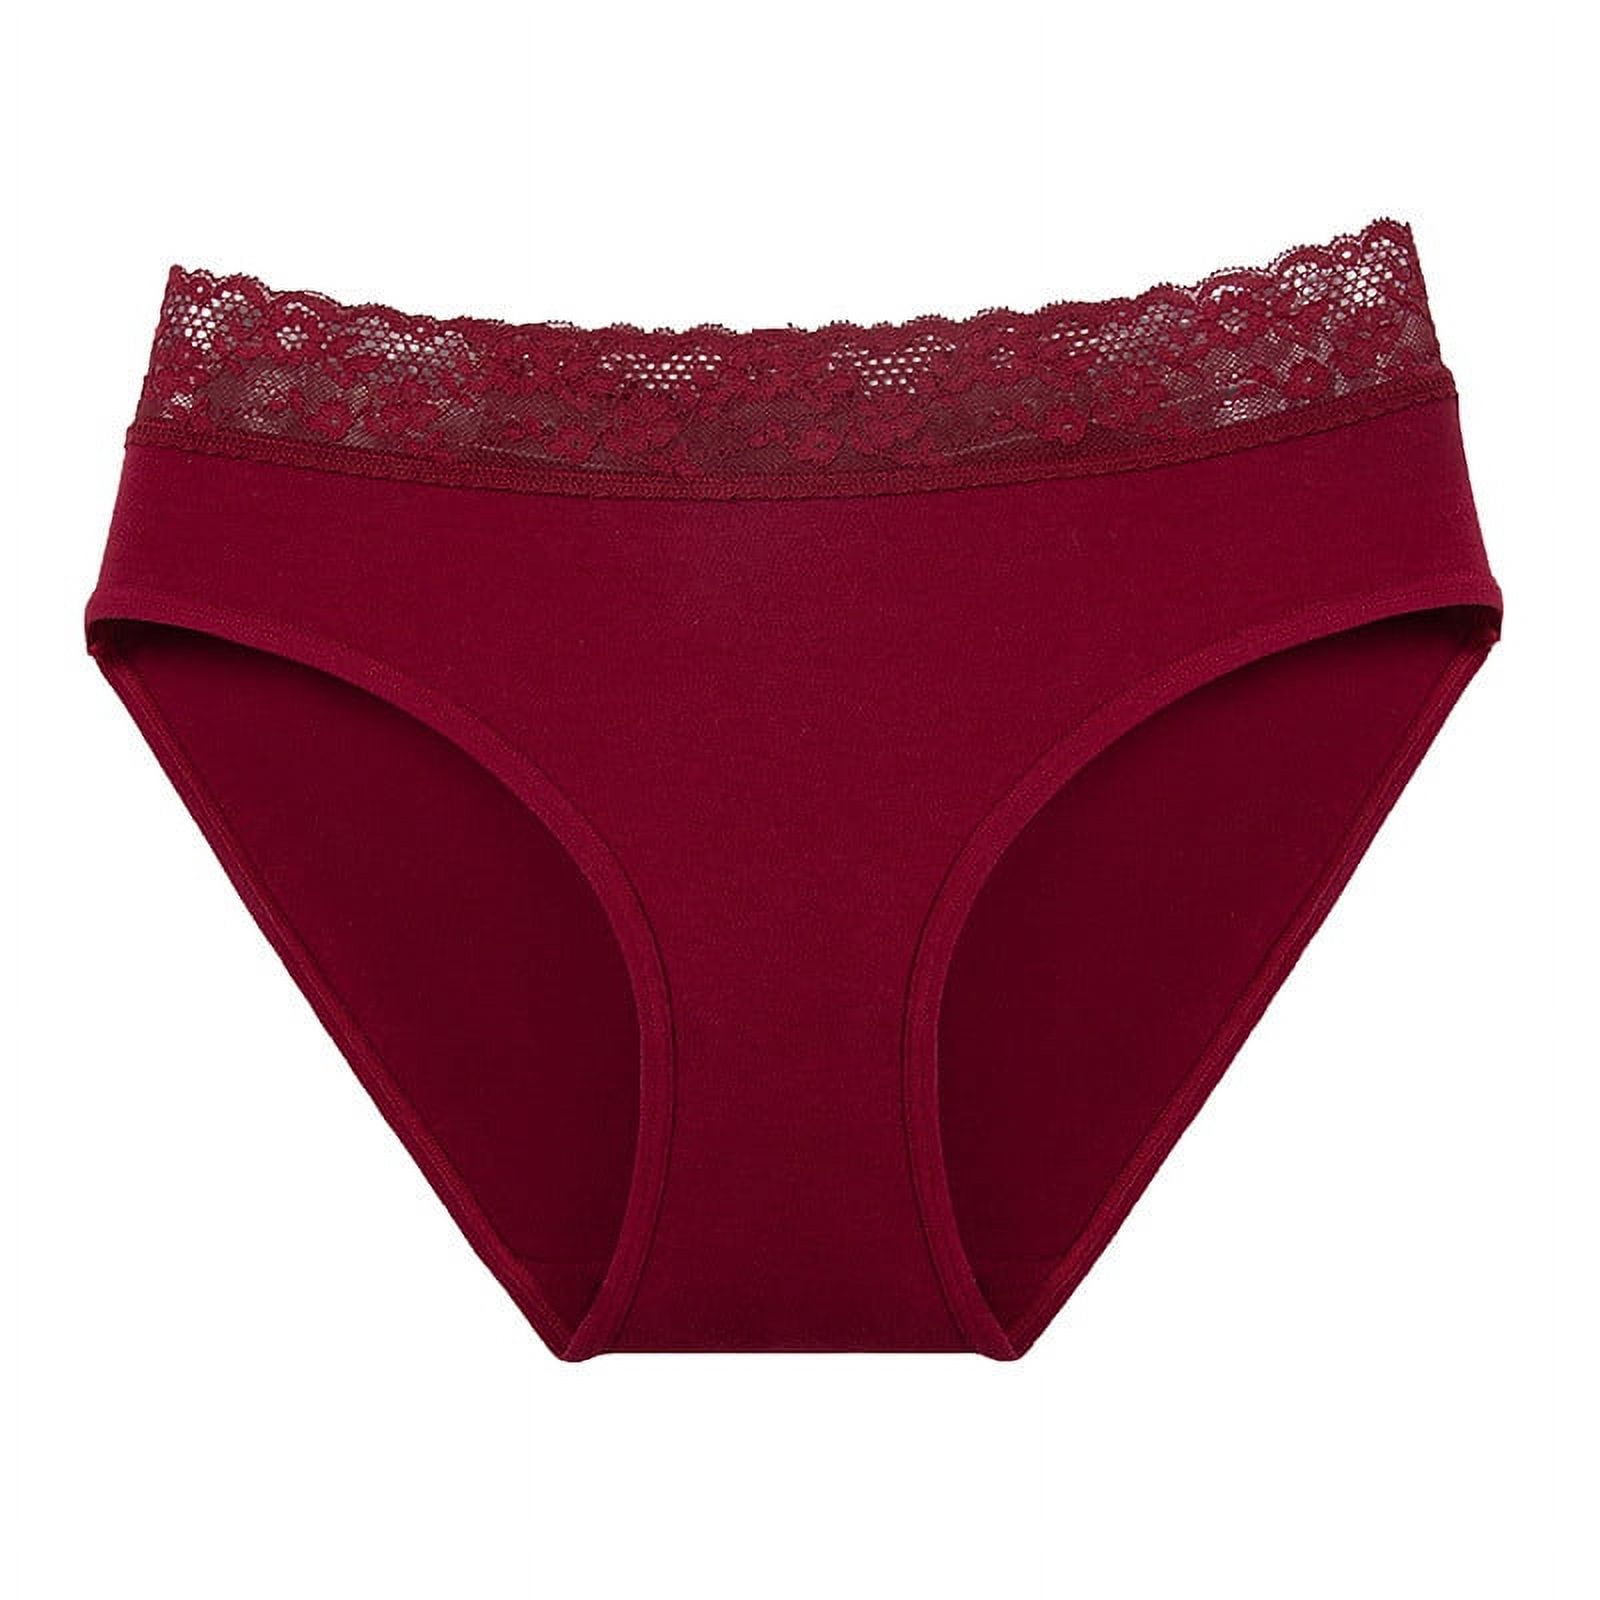 Qcmgmg Plus Size Womens Underwear Low Waisted Seamless Lace Briefs Cute  Underwear for Women Wine Red M 